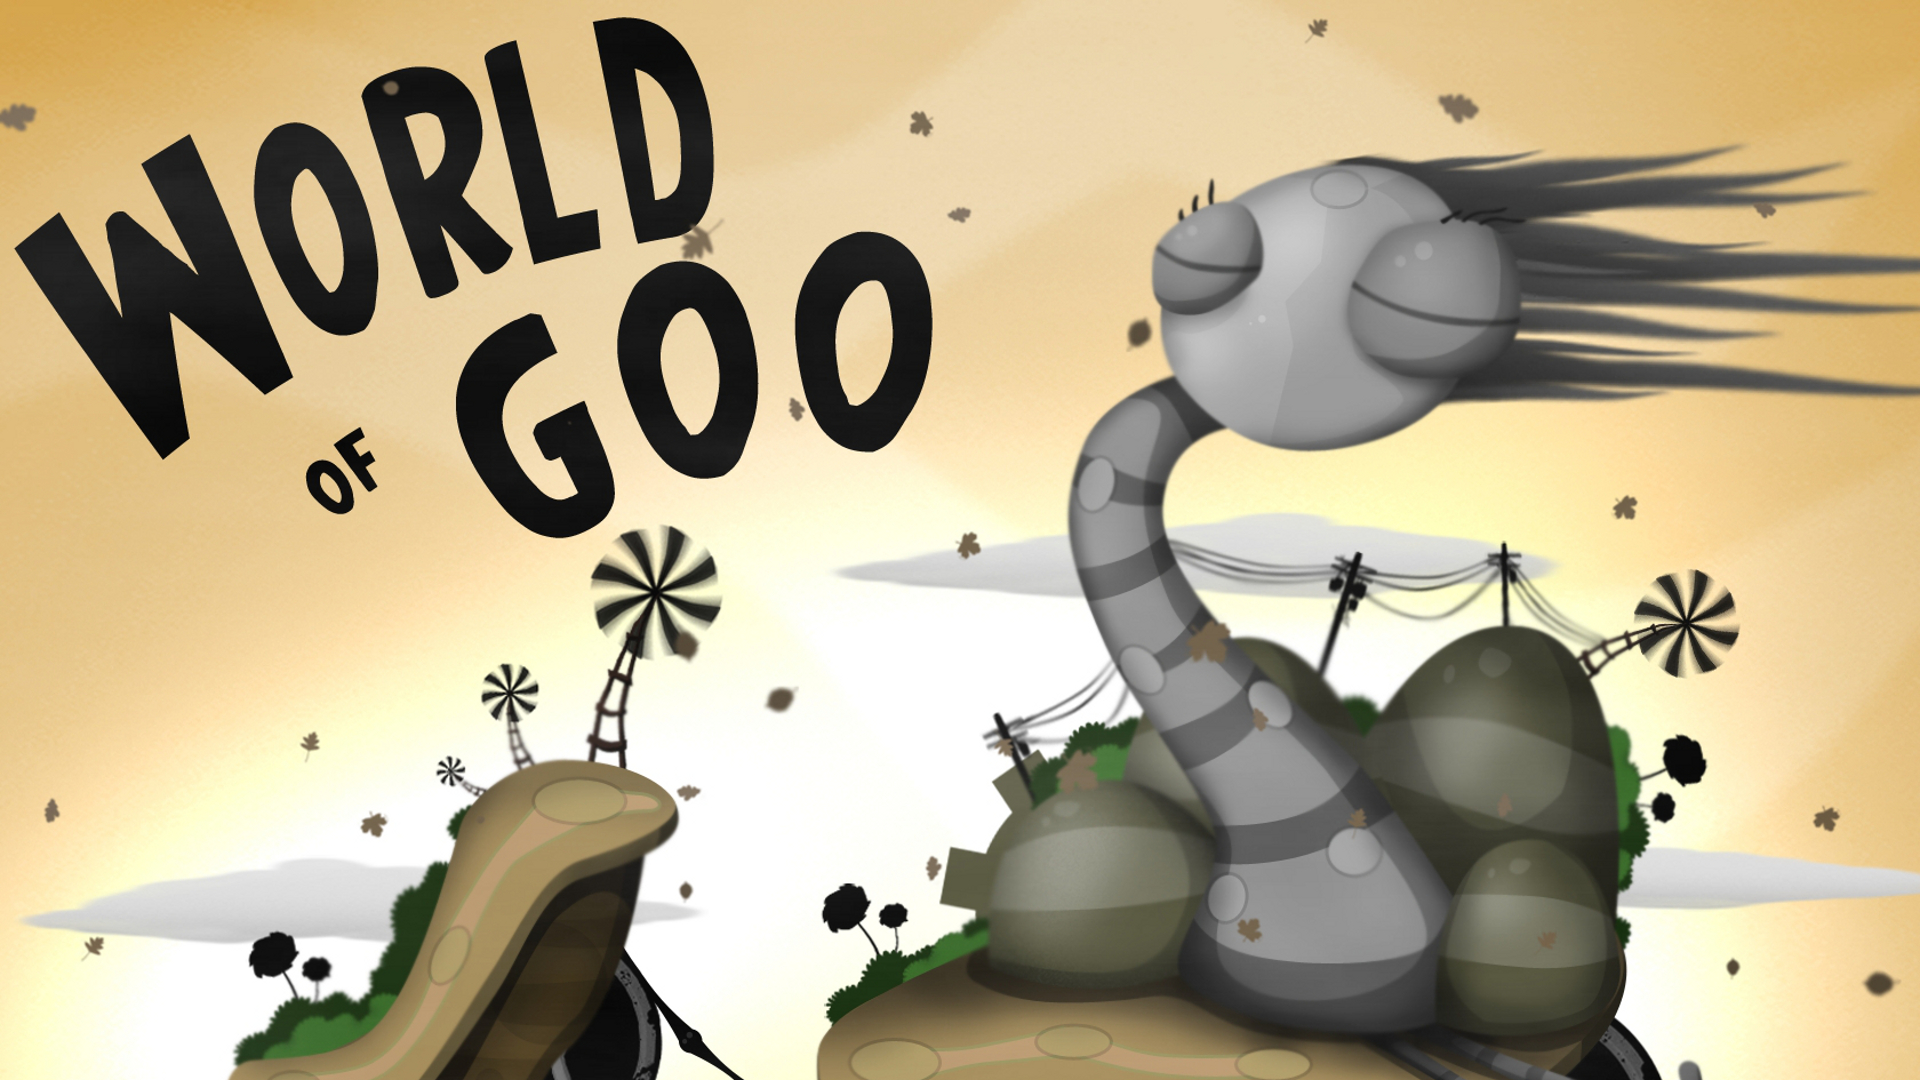 Video Game World of Goo HD Wallpaper | Background Image